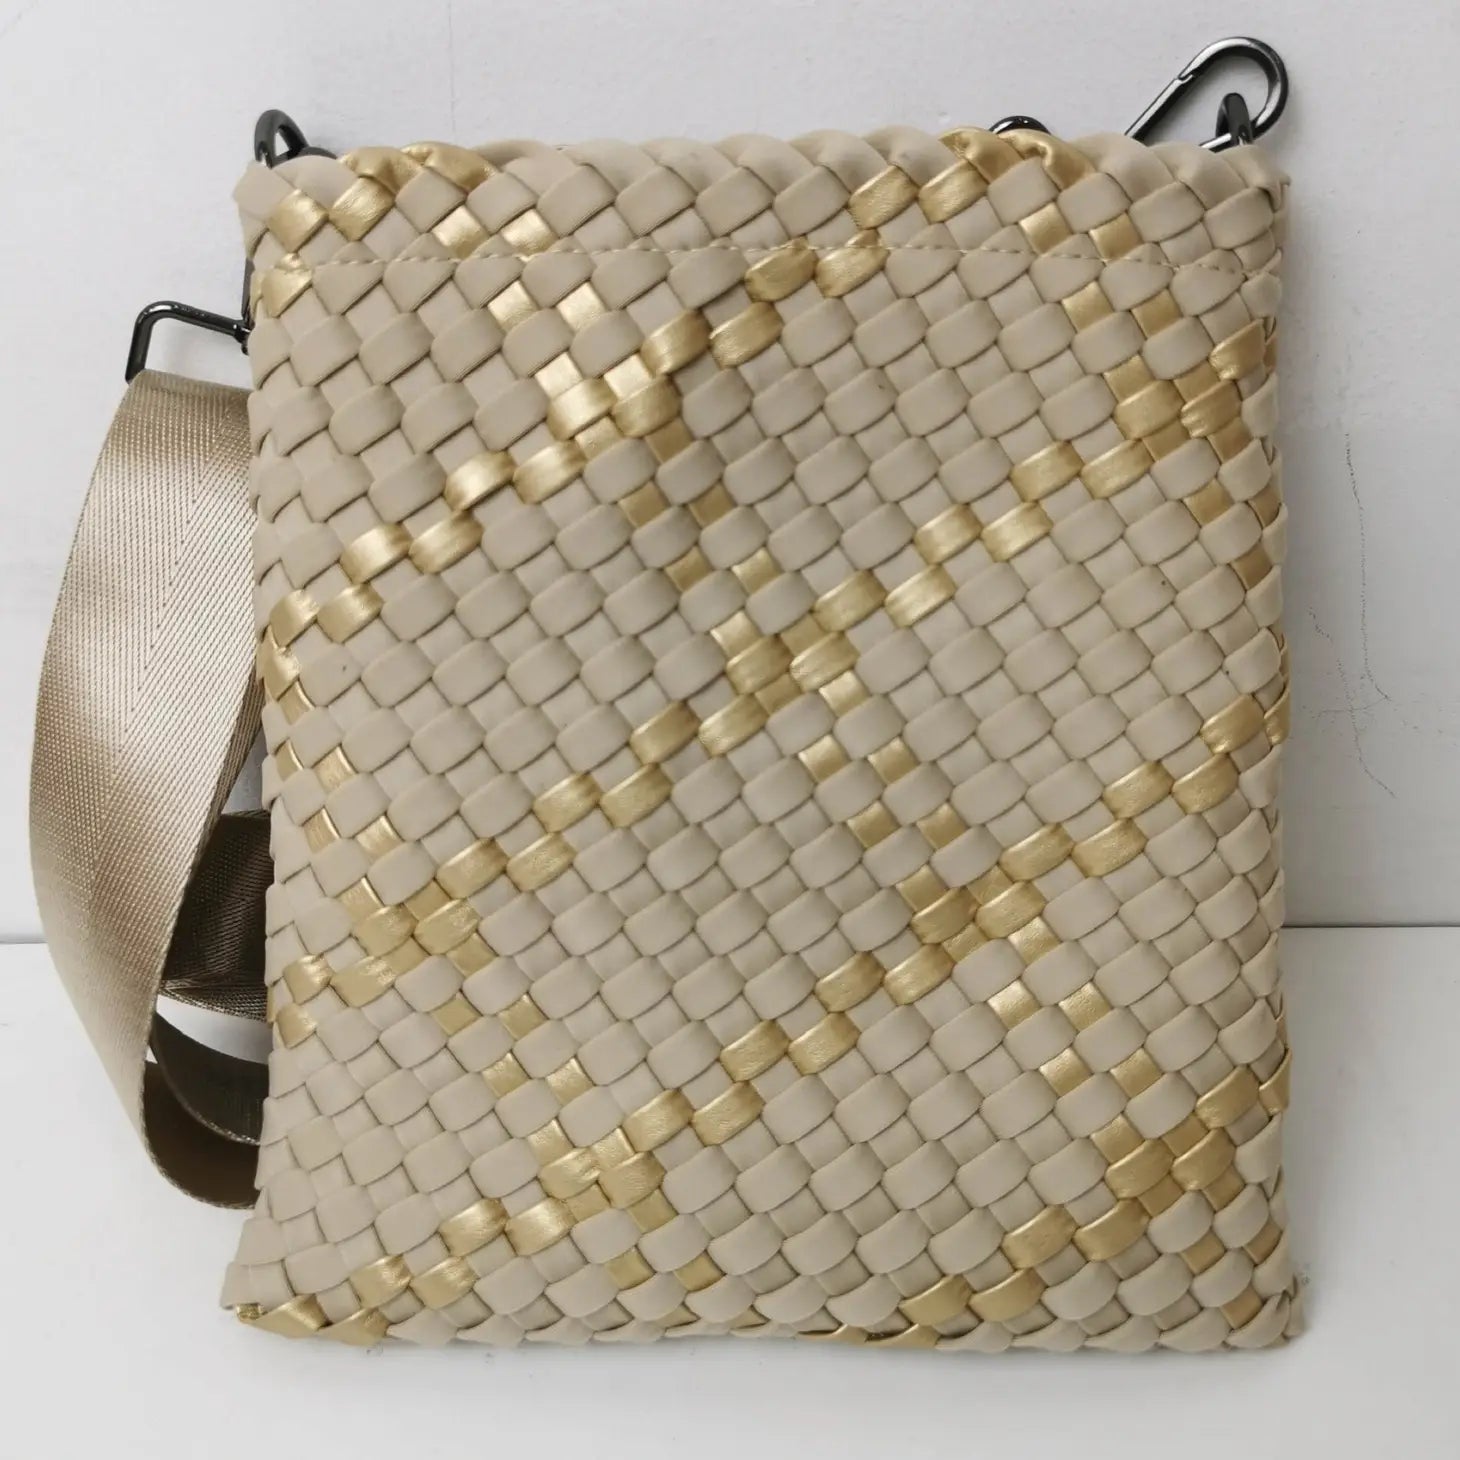 Woven Gold with Metallic Gold Crossbody